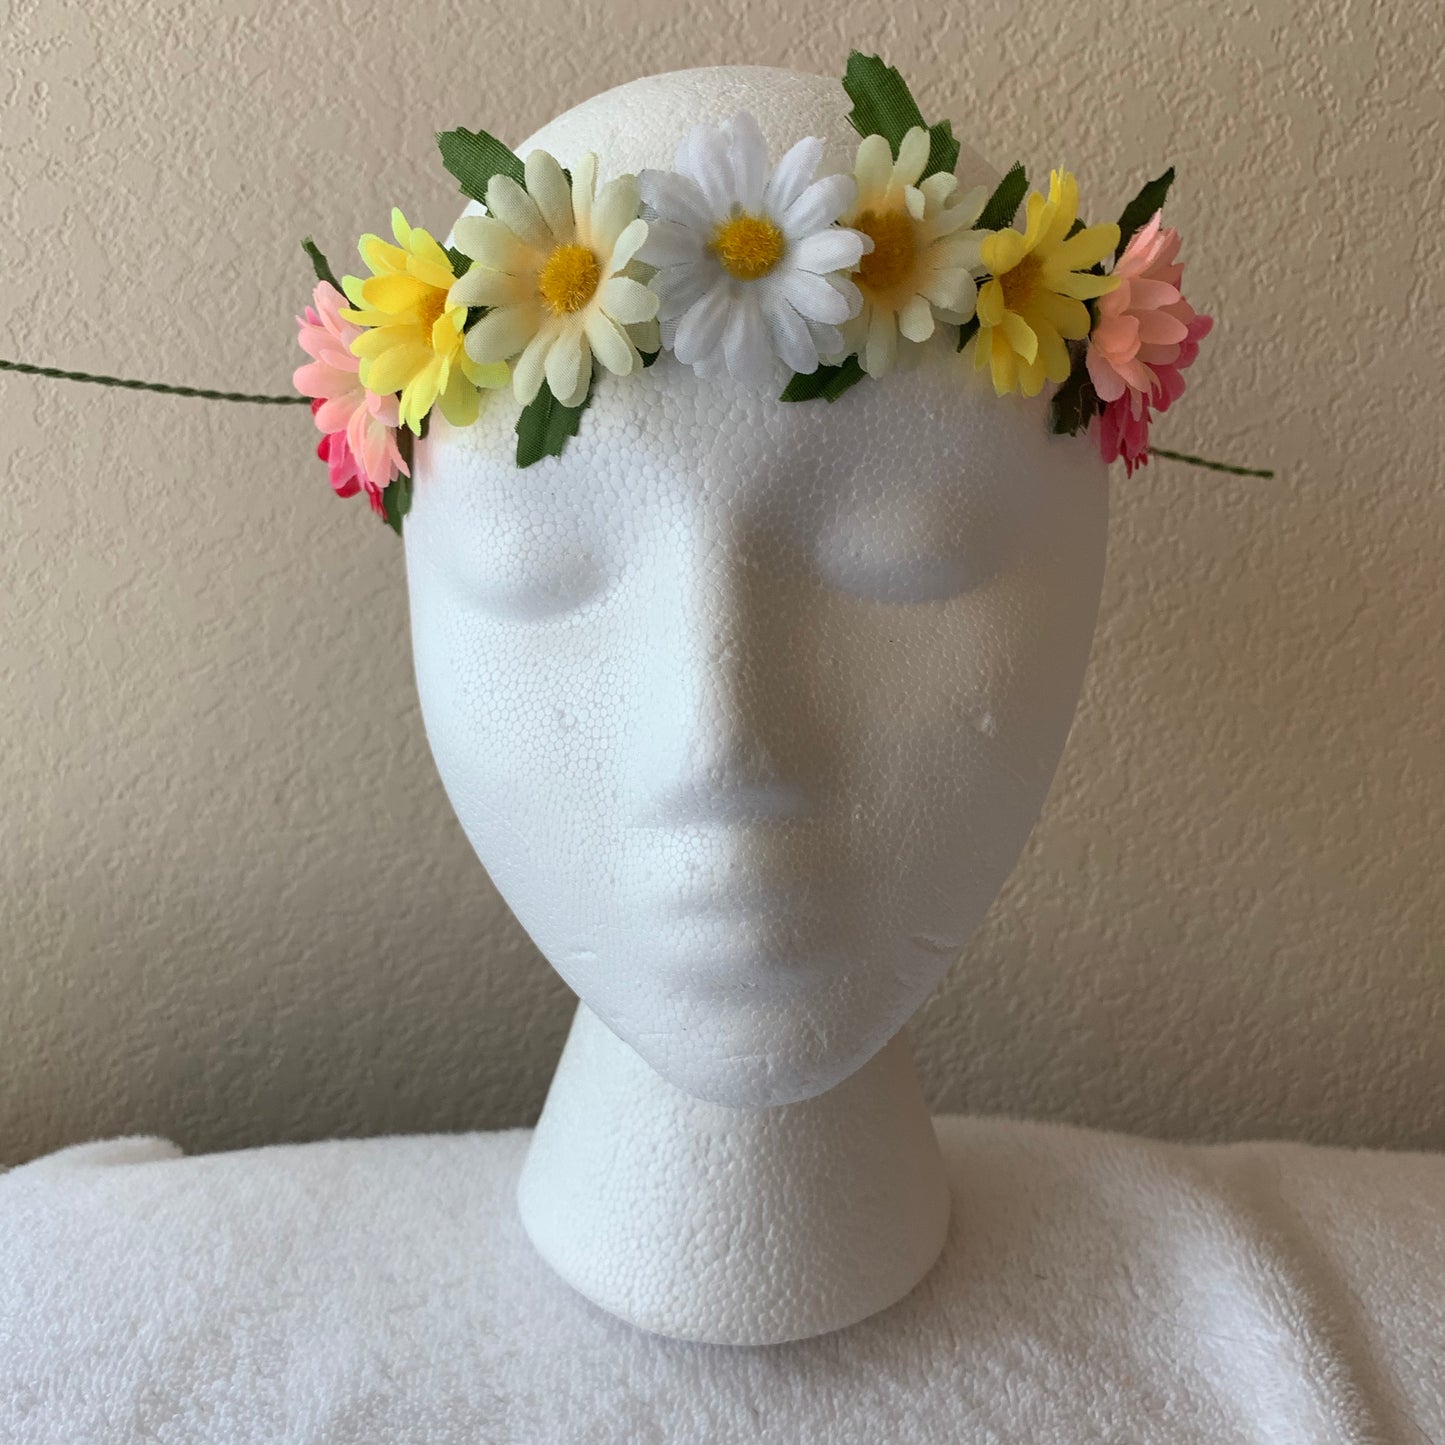 Extra Small Wreath - White, Yellow, and Pink Daisies